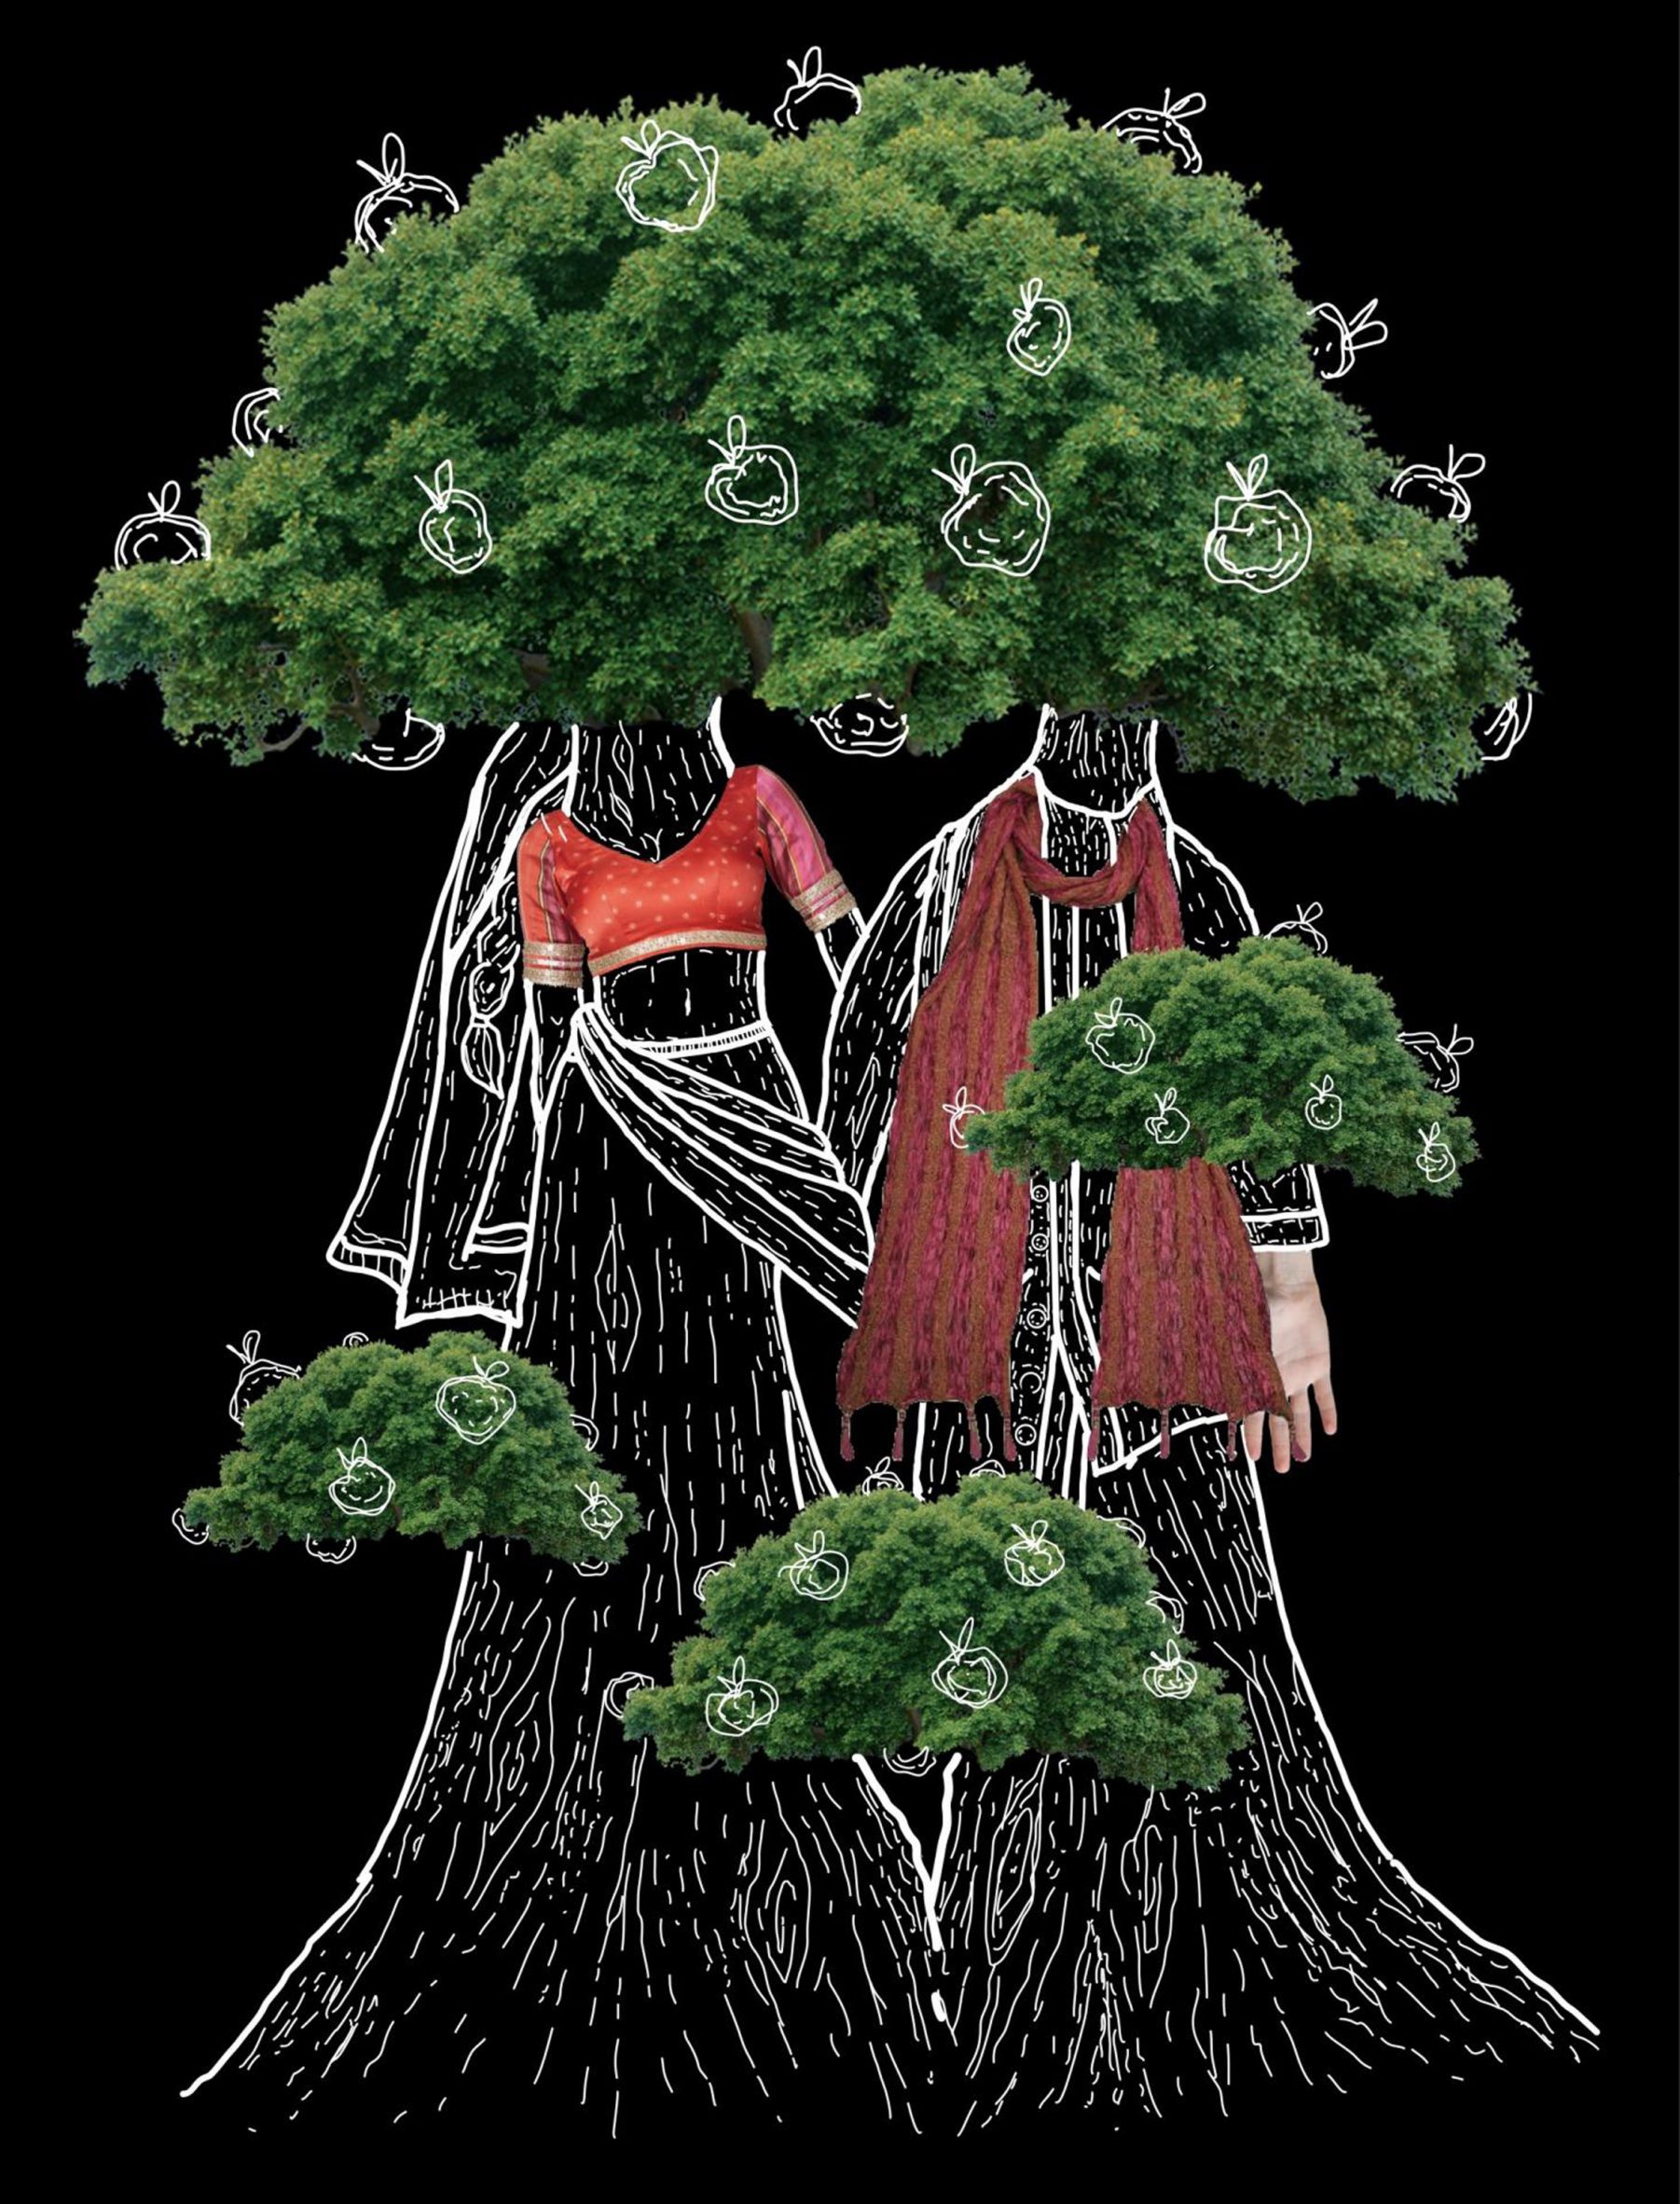 An illustration showing two people with bodies and heads that resemble trees